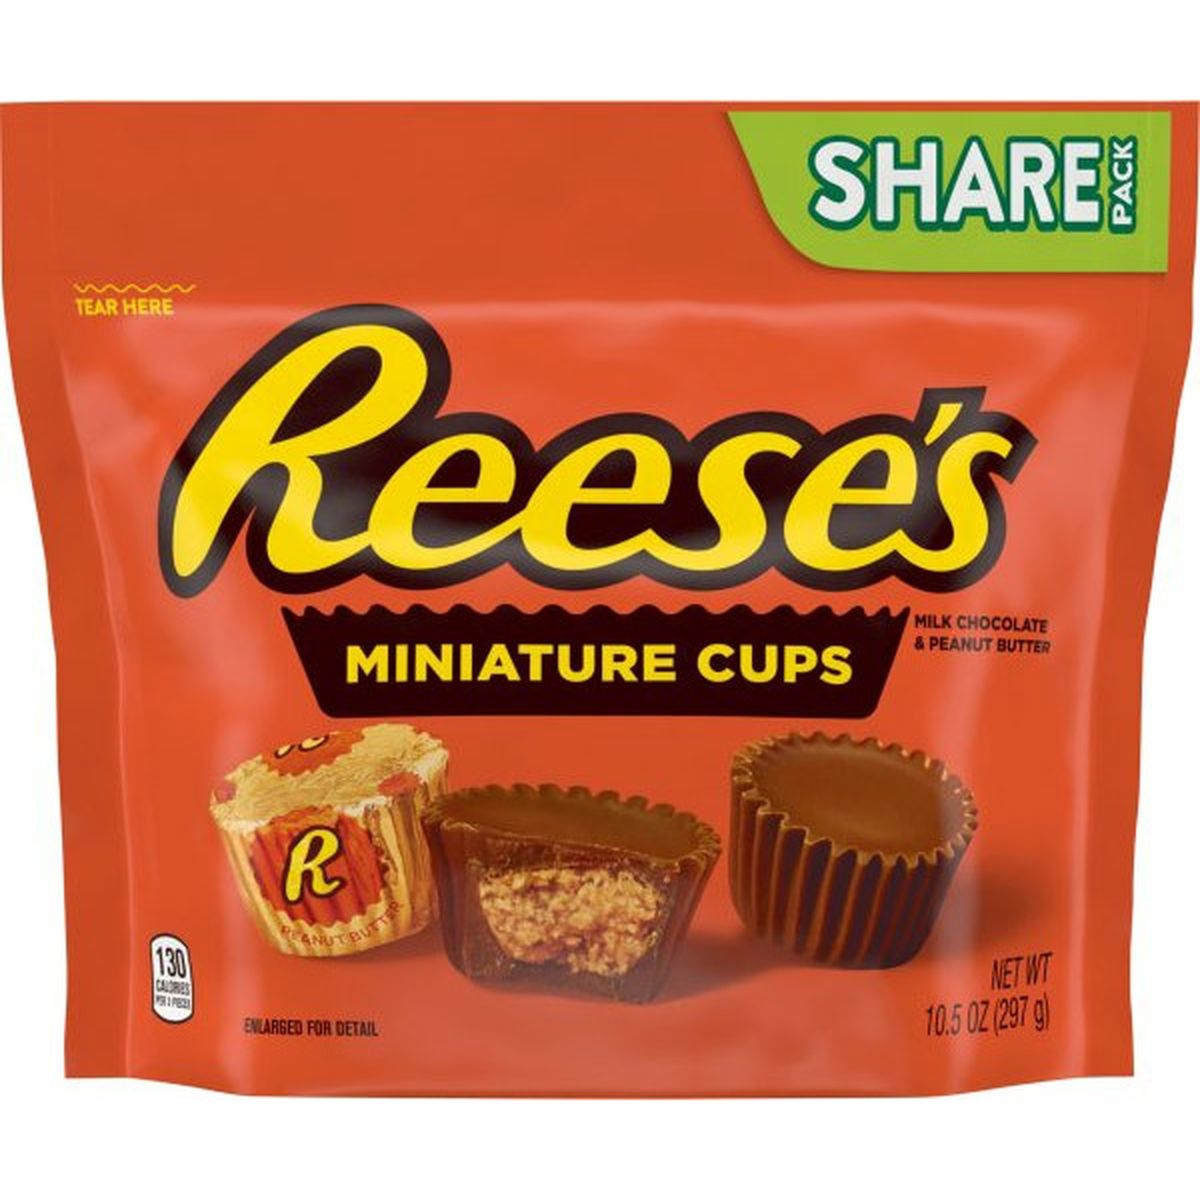 Calories in Reese's Miniature Cups, Milk Chocolate & Peanut Butter, Share Pack